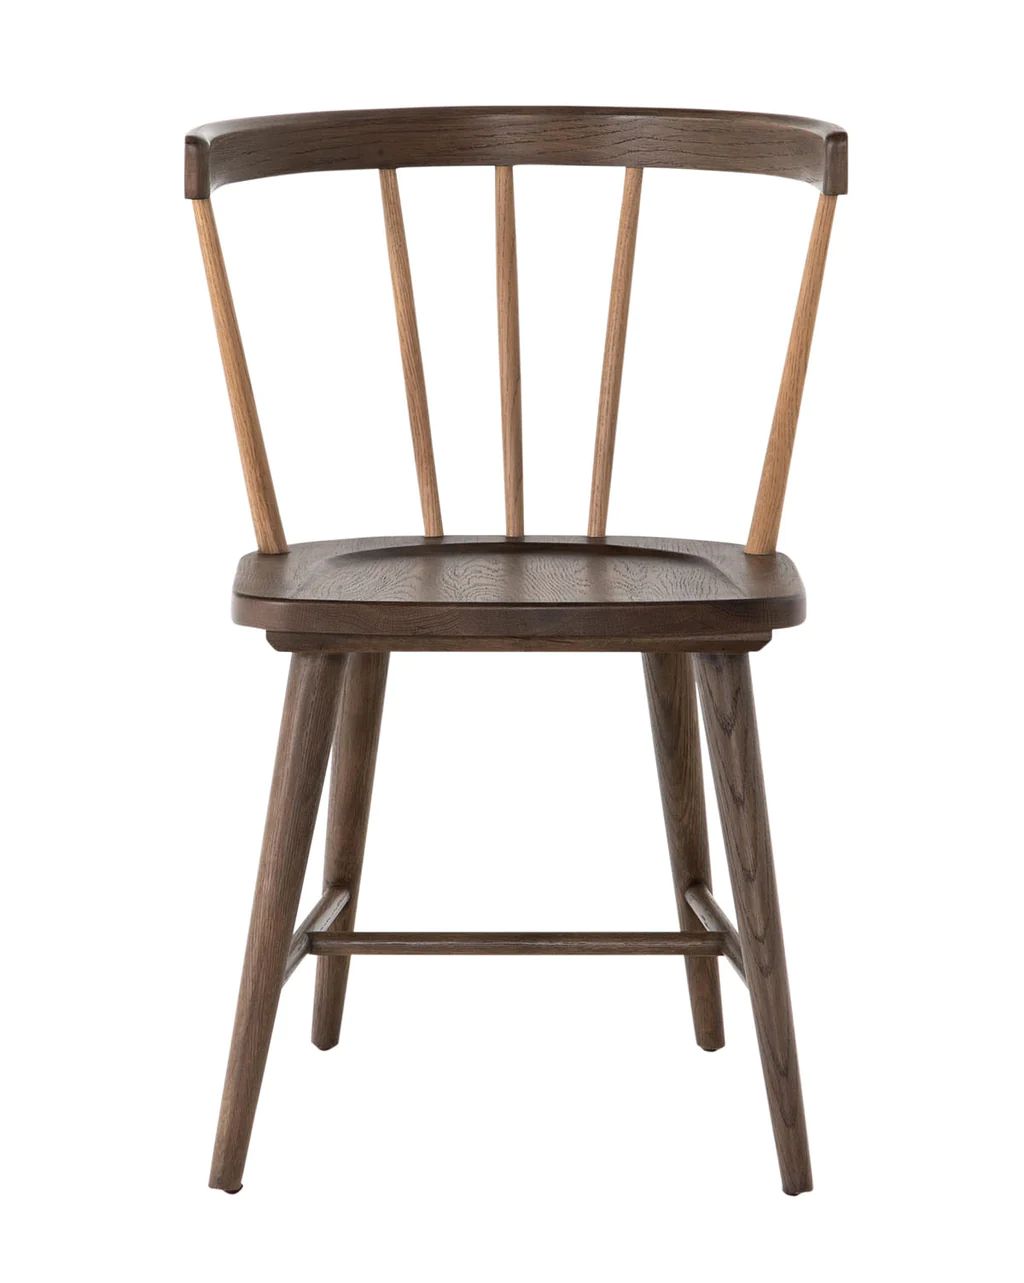 Finnick Chair | McGee & Co.